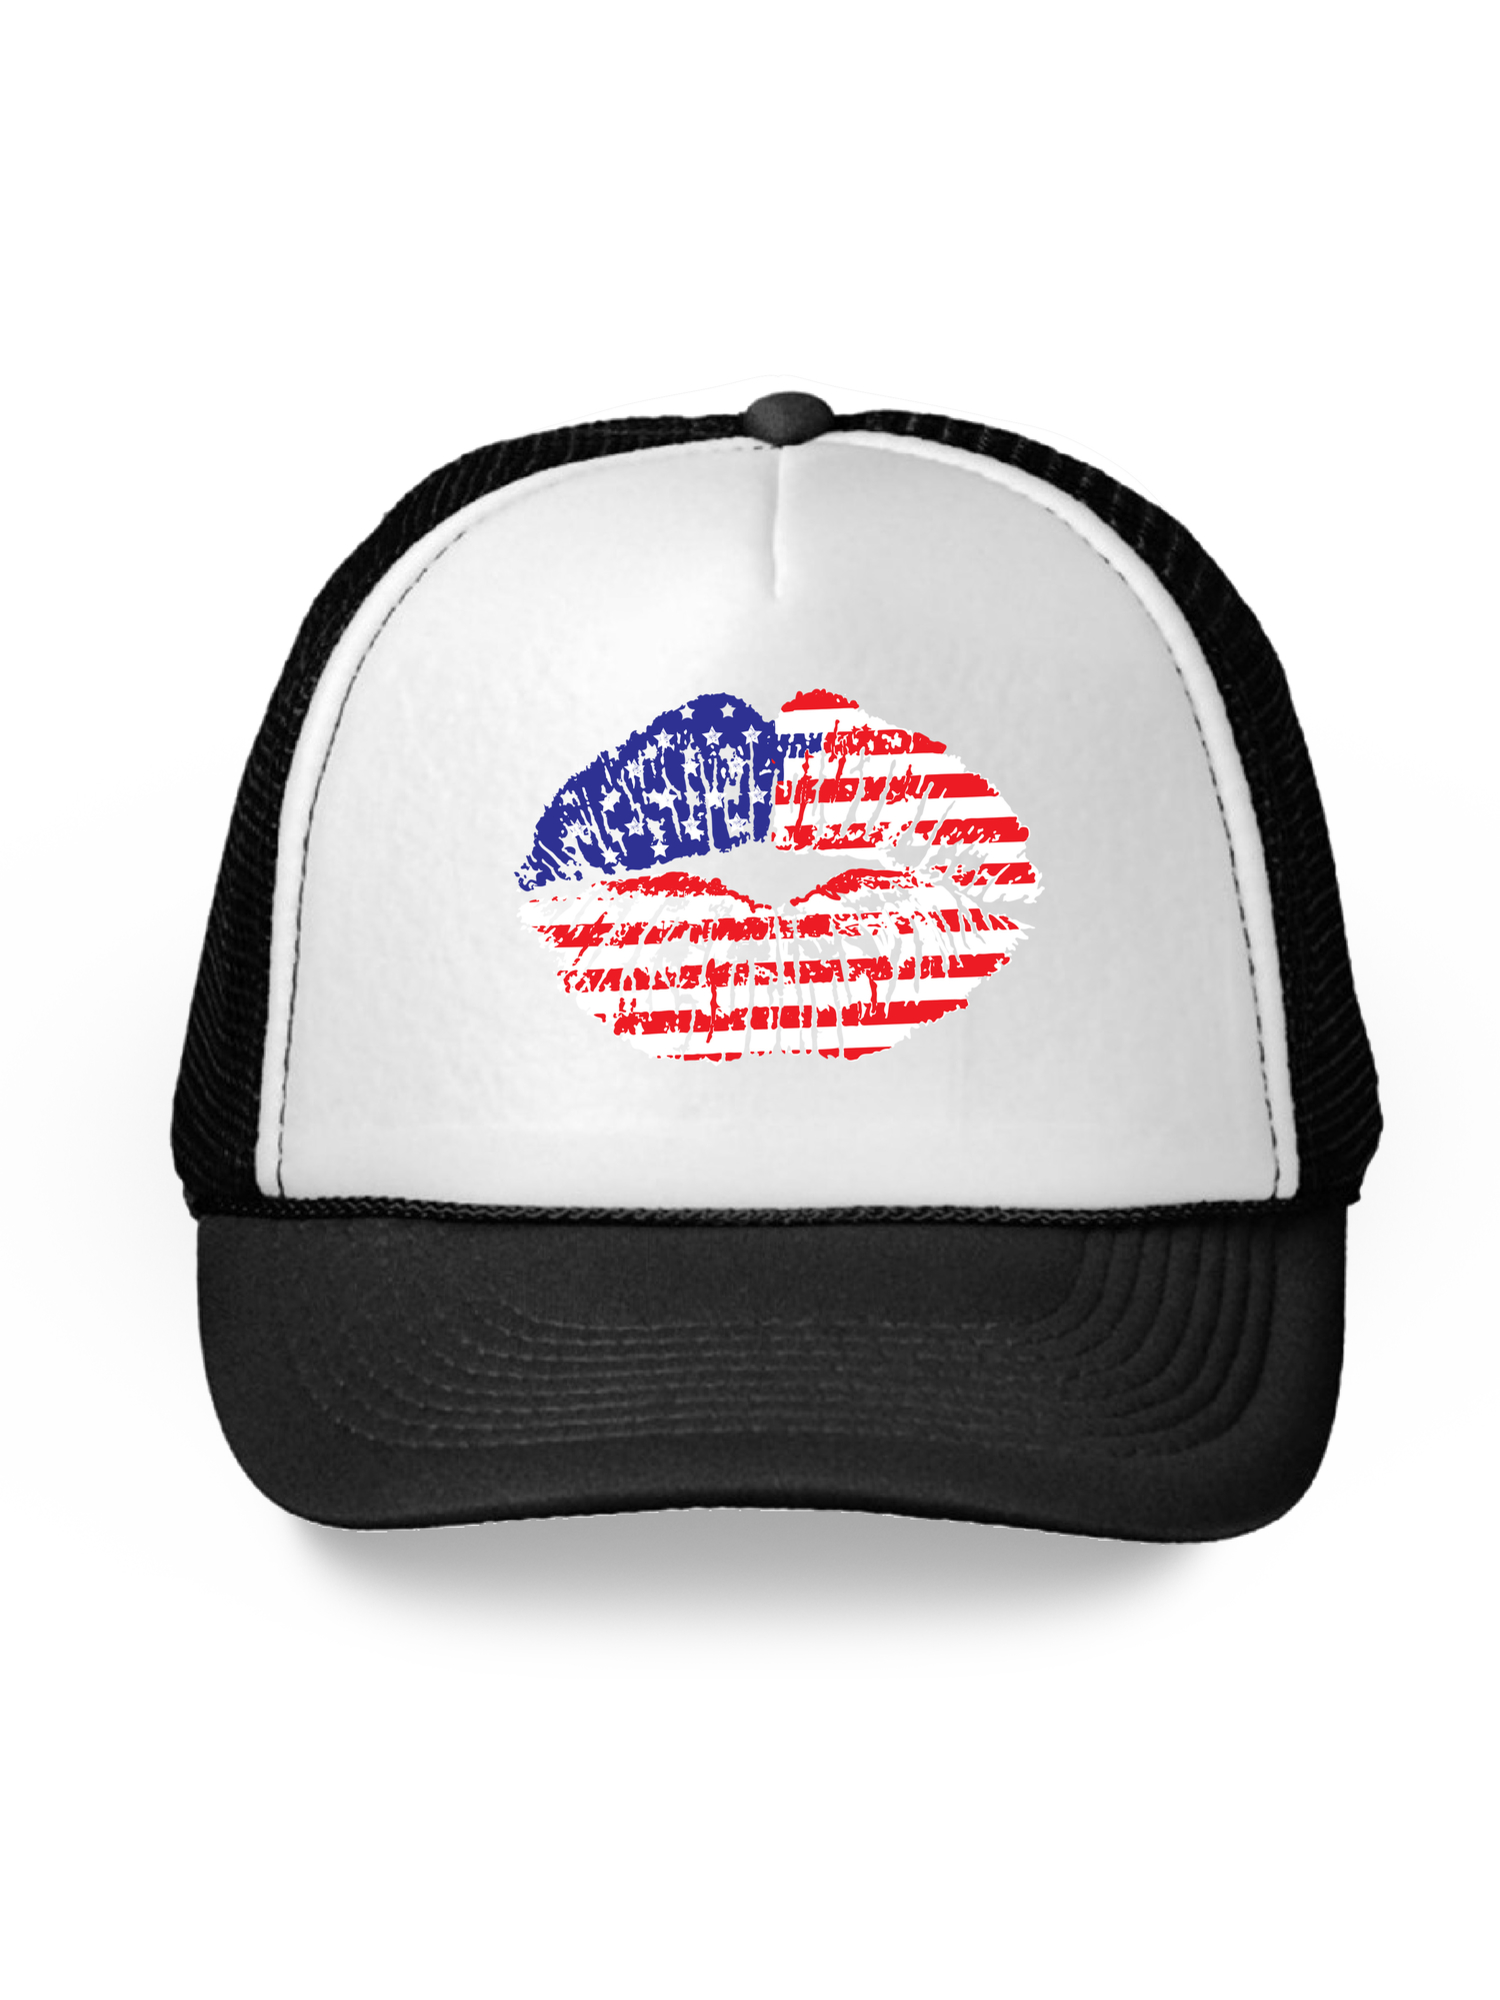 Awkward Styles American Lips Trucker Hat USA Flag Hats for Women Men USA Gifts American Flag Hat USA Baseball Cap Patriotic Hat American Flag Men Women 4th of July Hat 4th of July Accessories - image 1 of 6